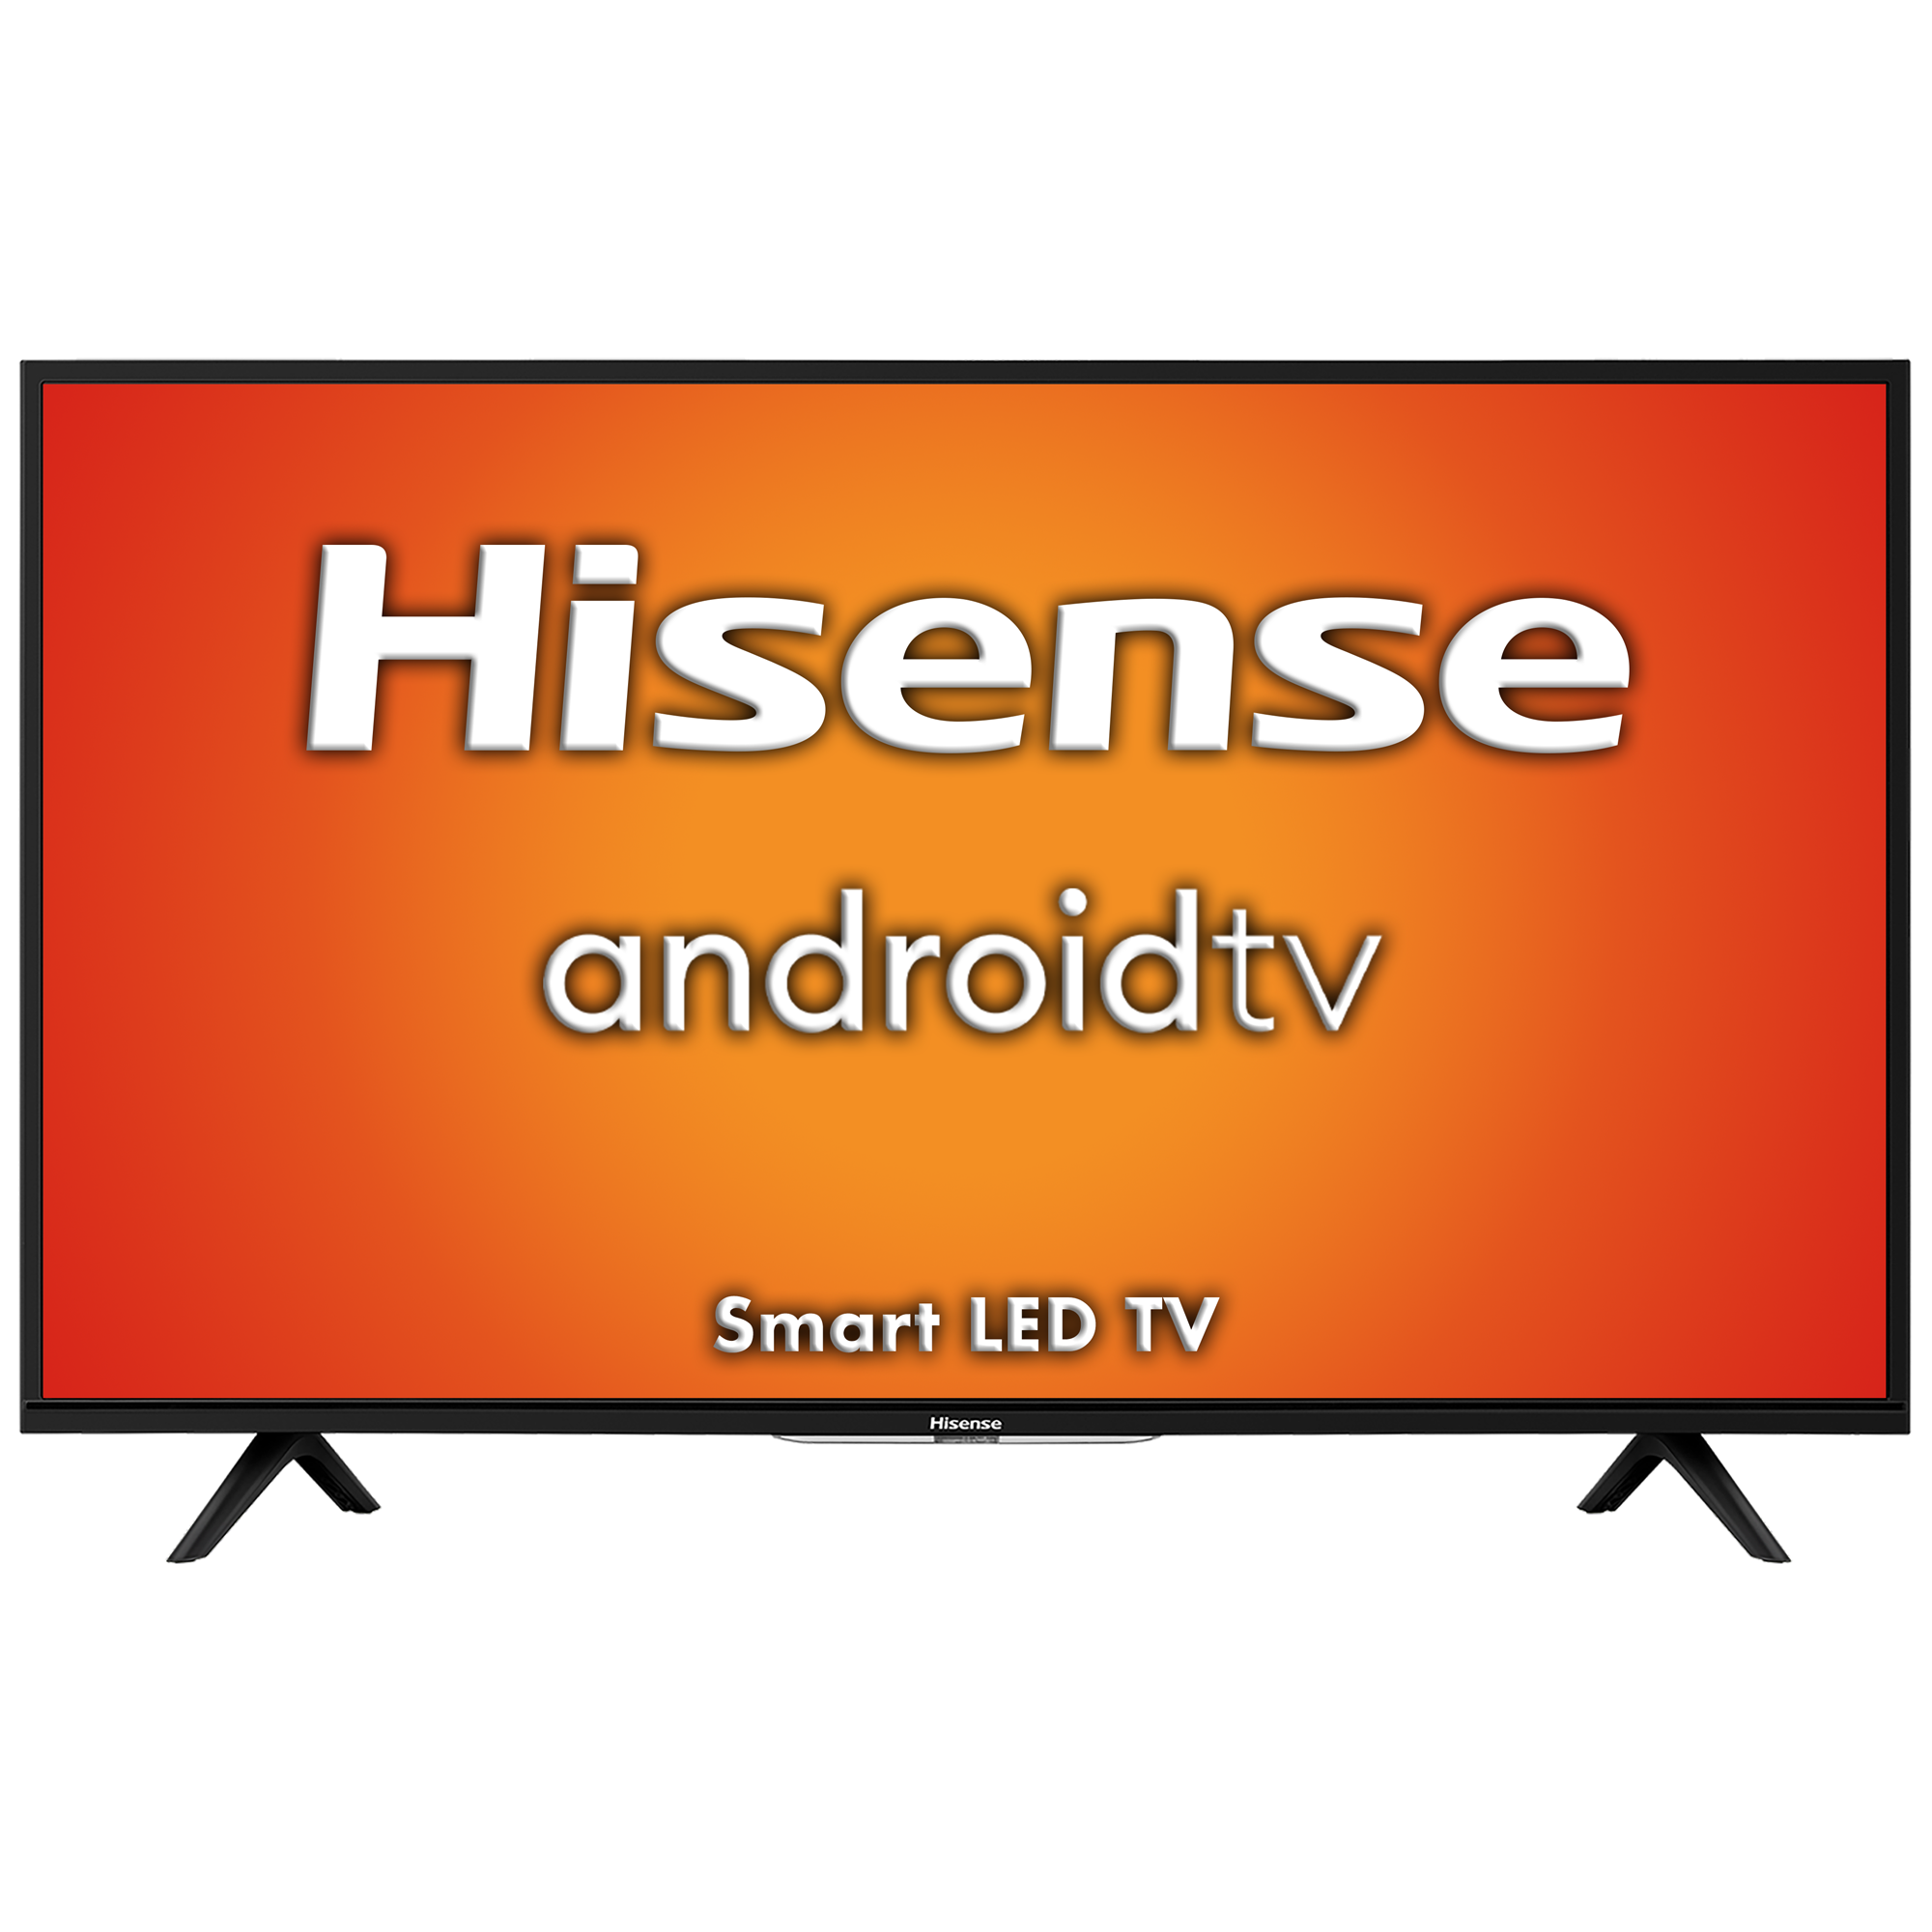 Hisense A56 Series 102cm (40 Inch) Full HD LED Android Smart TV (1 Year Warranty, Built-in Chromecast, 40A56E, Black)_1